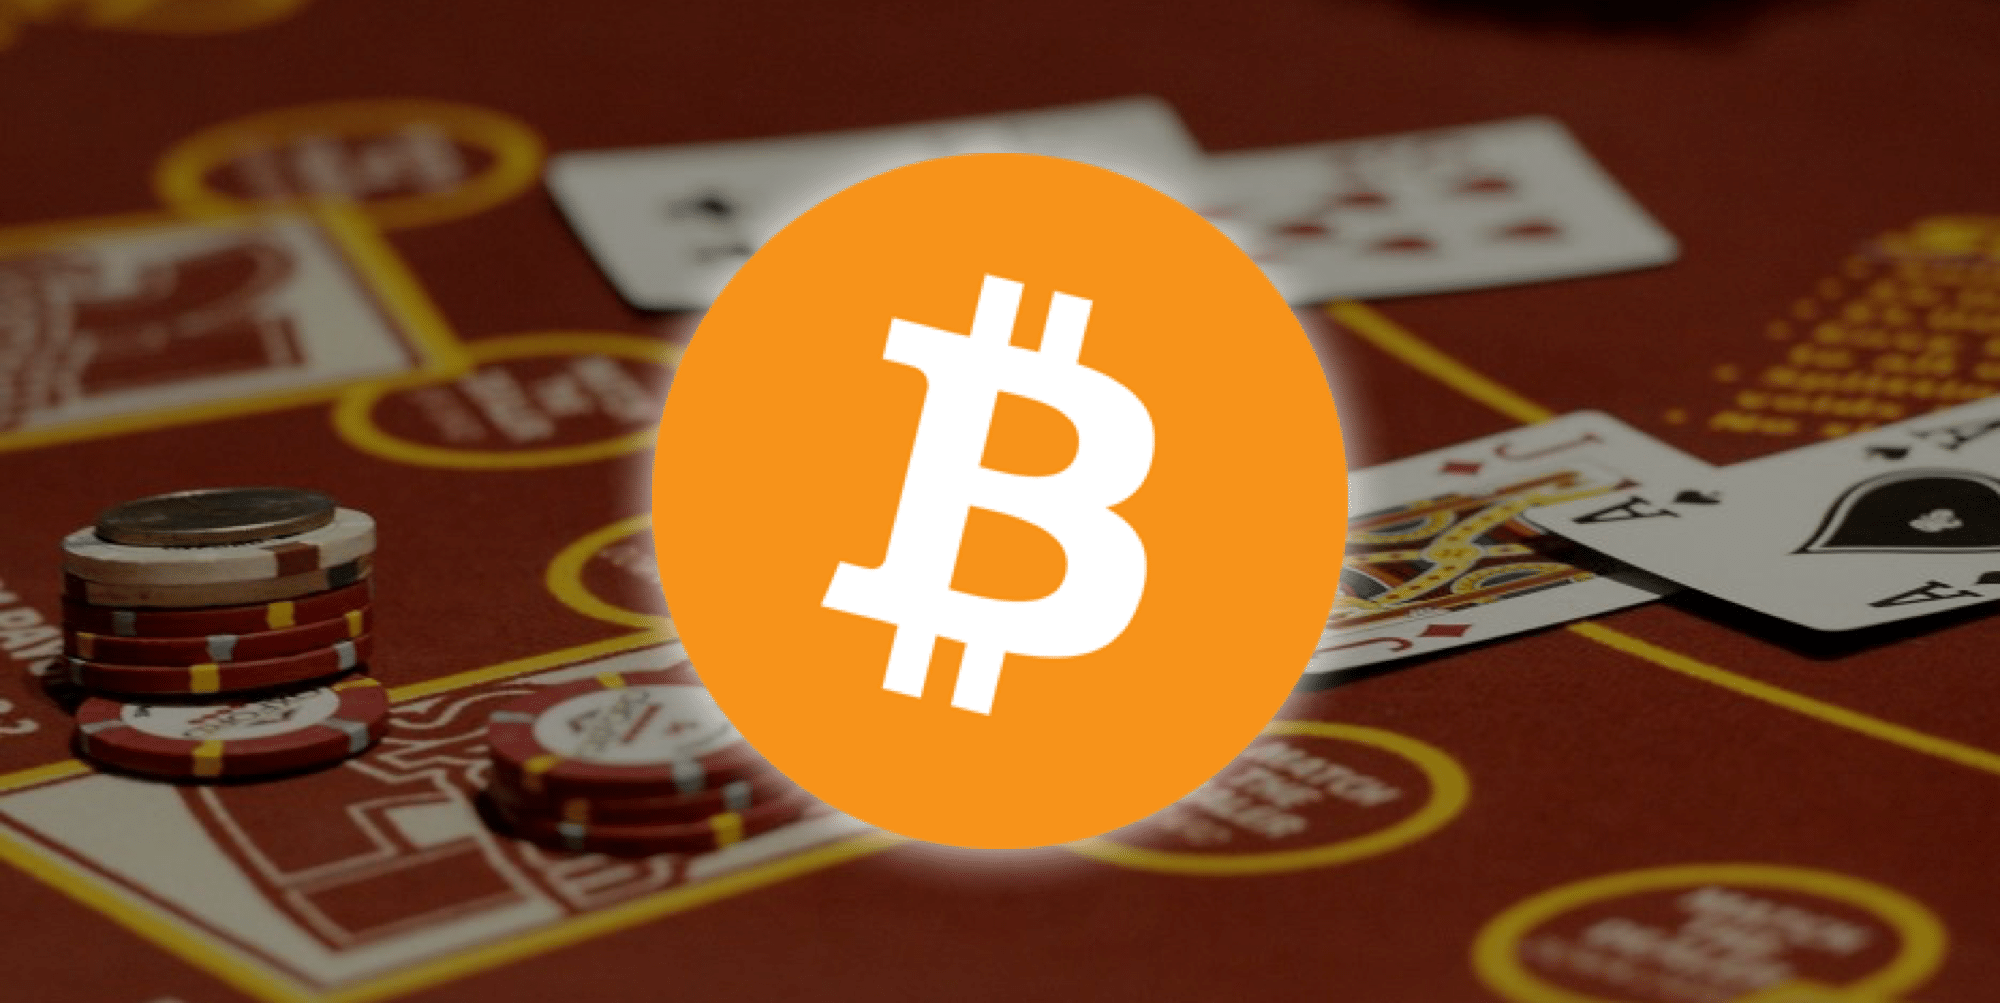 Reasons Why U.S. Authorities Are Challenged to Legalize Bitcoin Casino Transactions